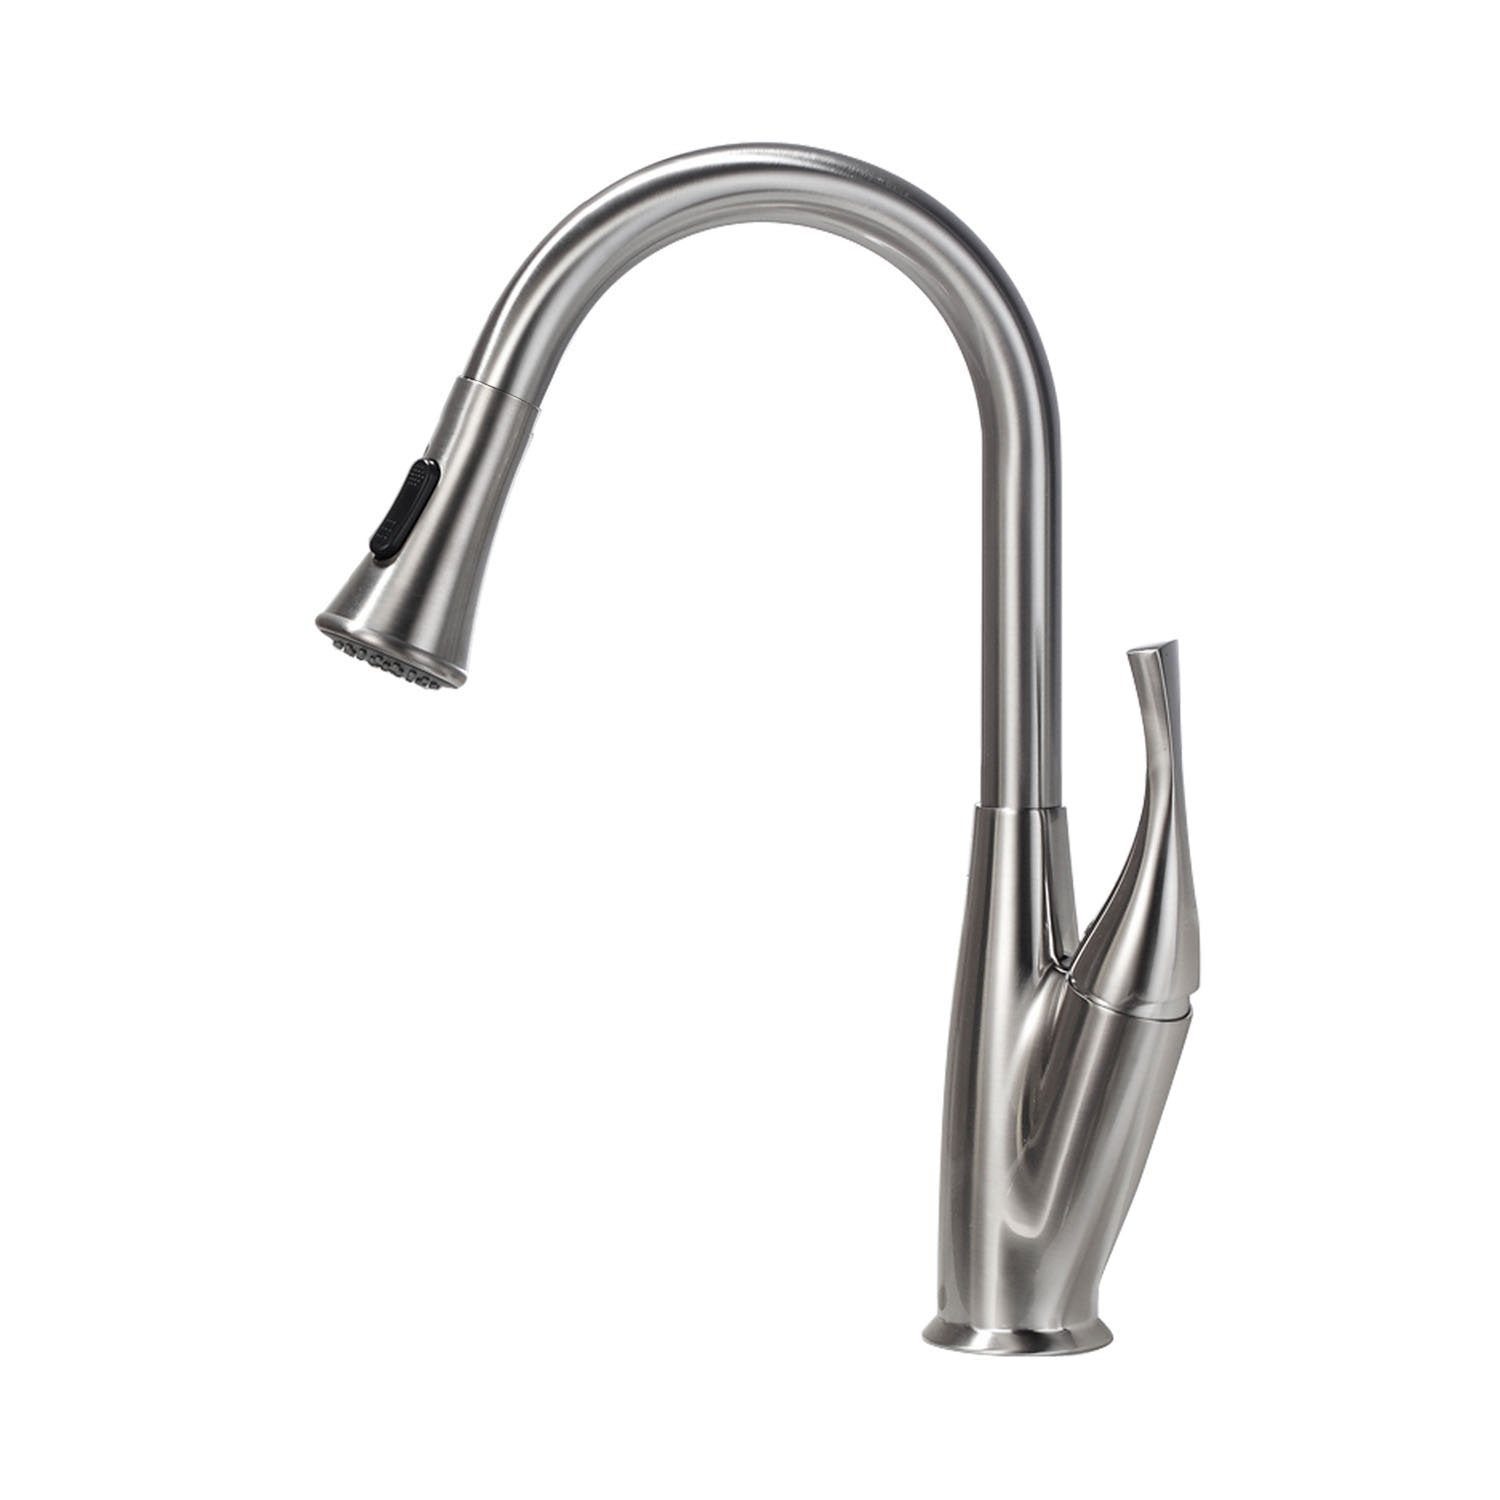 Lordear Flower Vase Shape Kitchen Sink Faucet with Pull Down Sprayer | Kitchen Faucets | Lordear